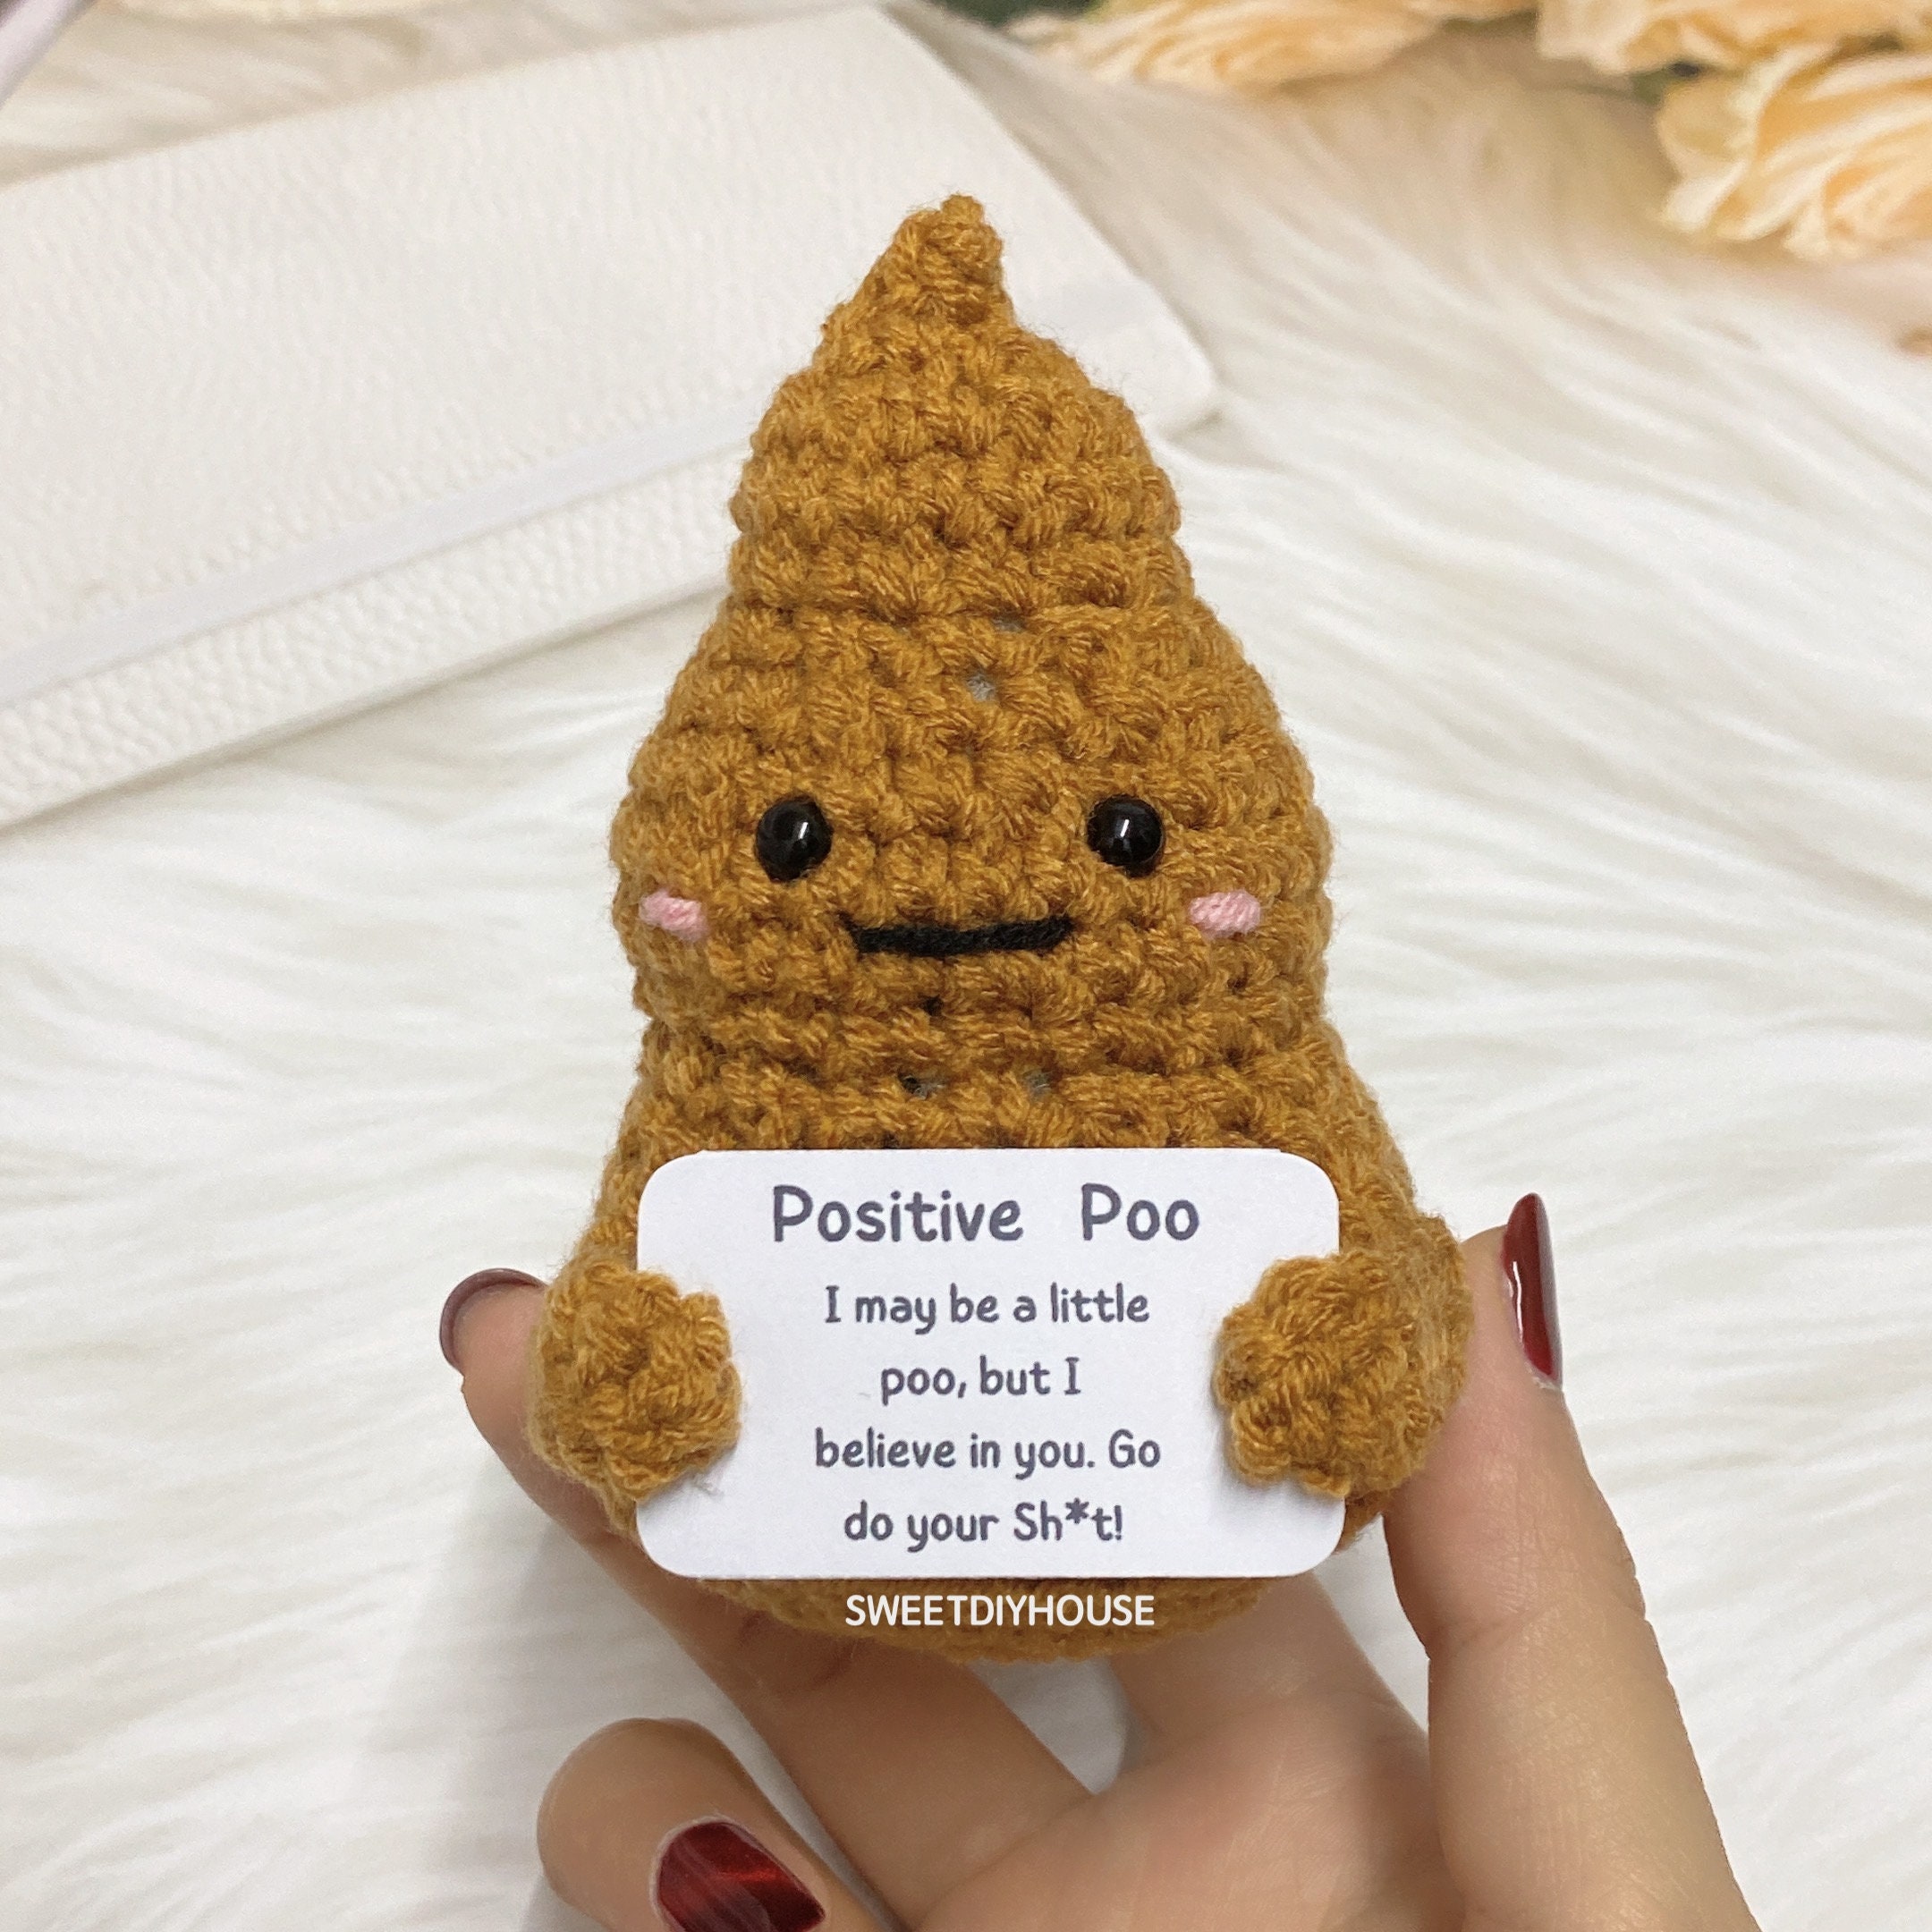 The Positive Poo